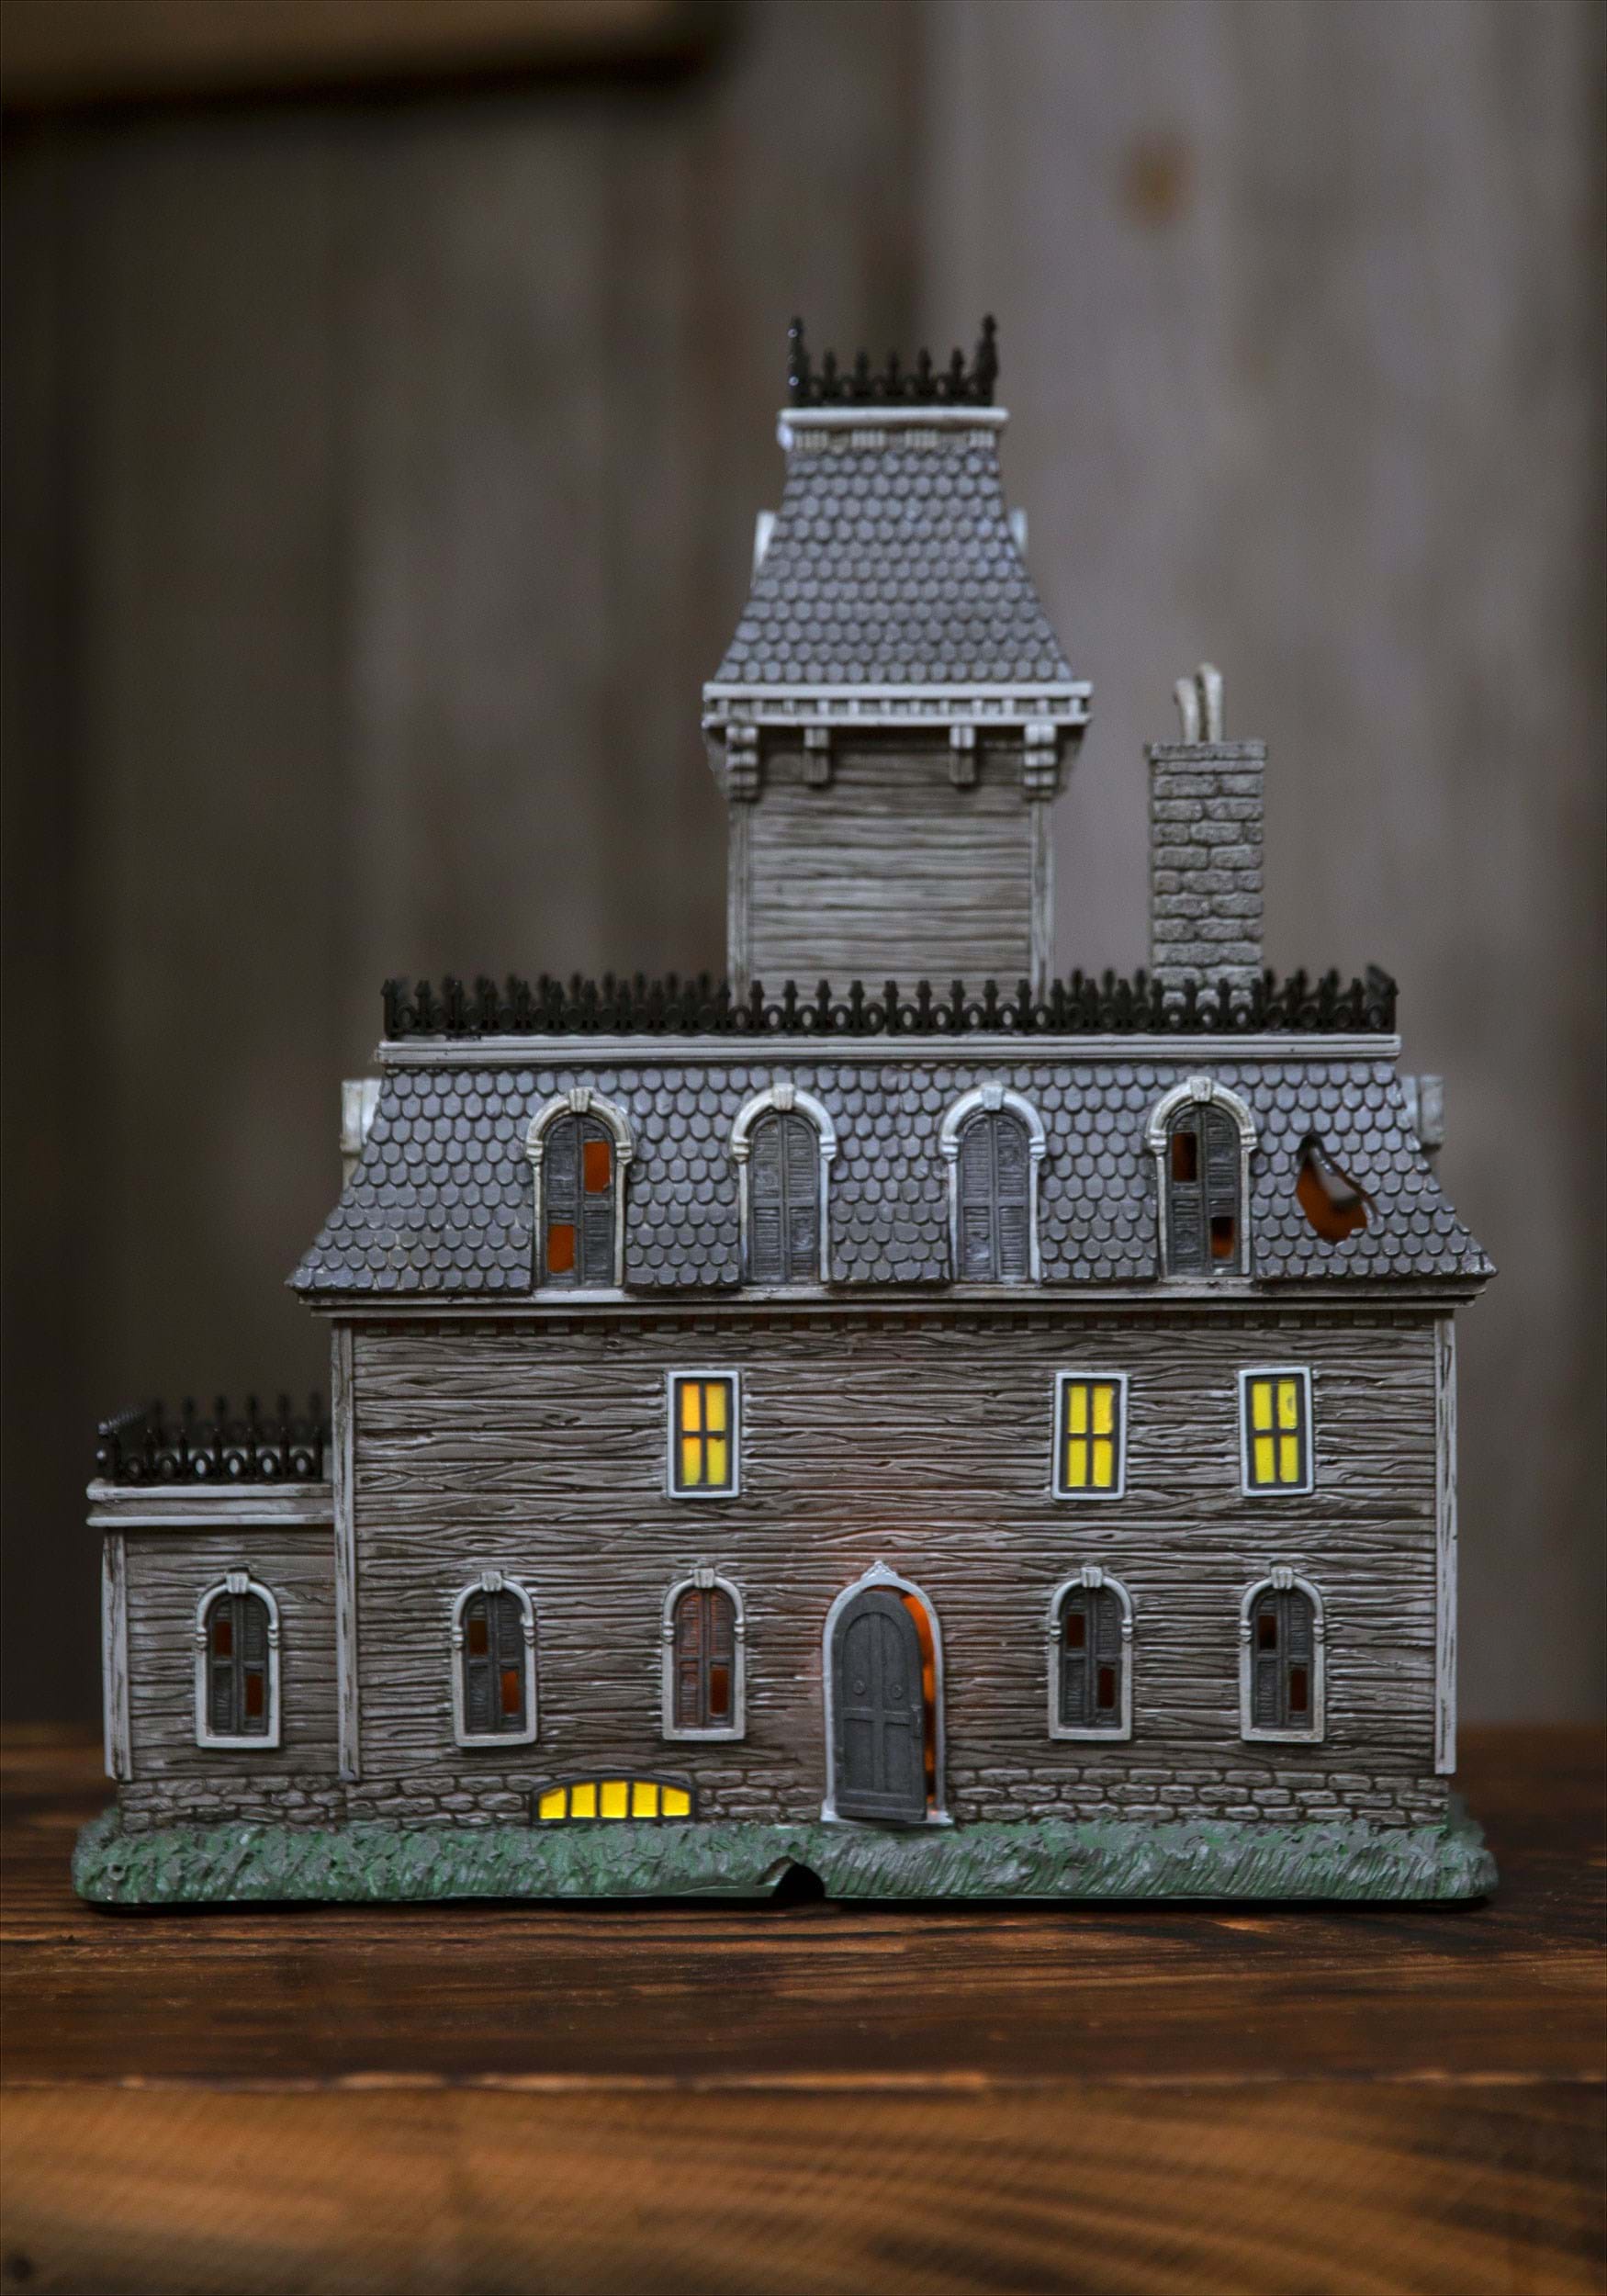 The Addams Family Lighted House Building By Department 56 Please grow this little channel up by subscribing. department 56 the addams family house lighted building